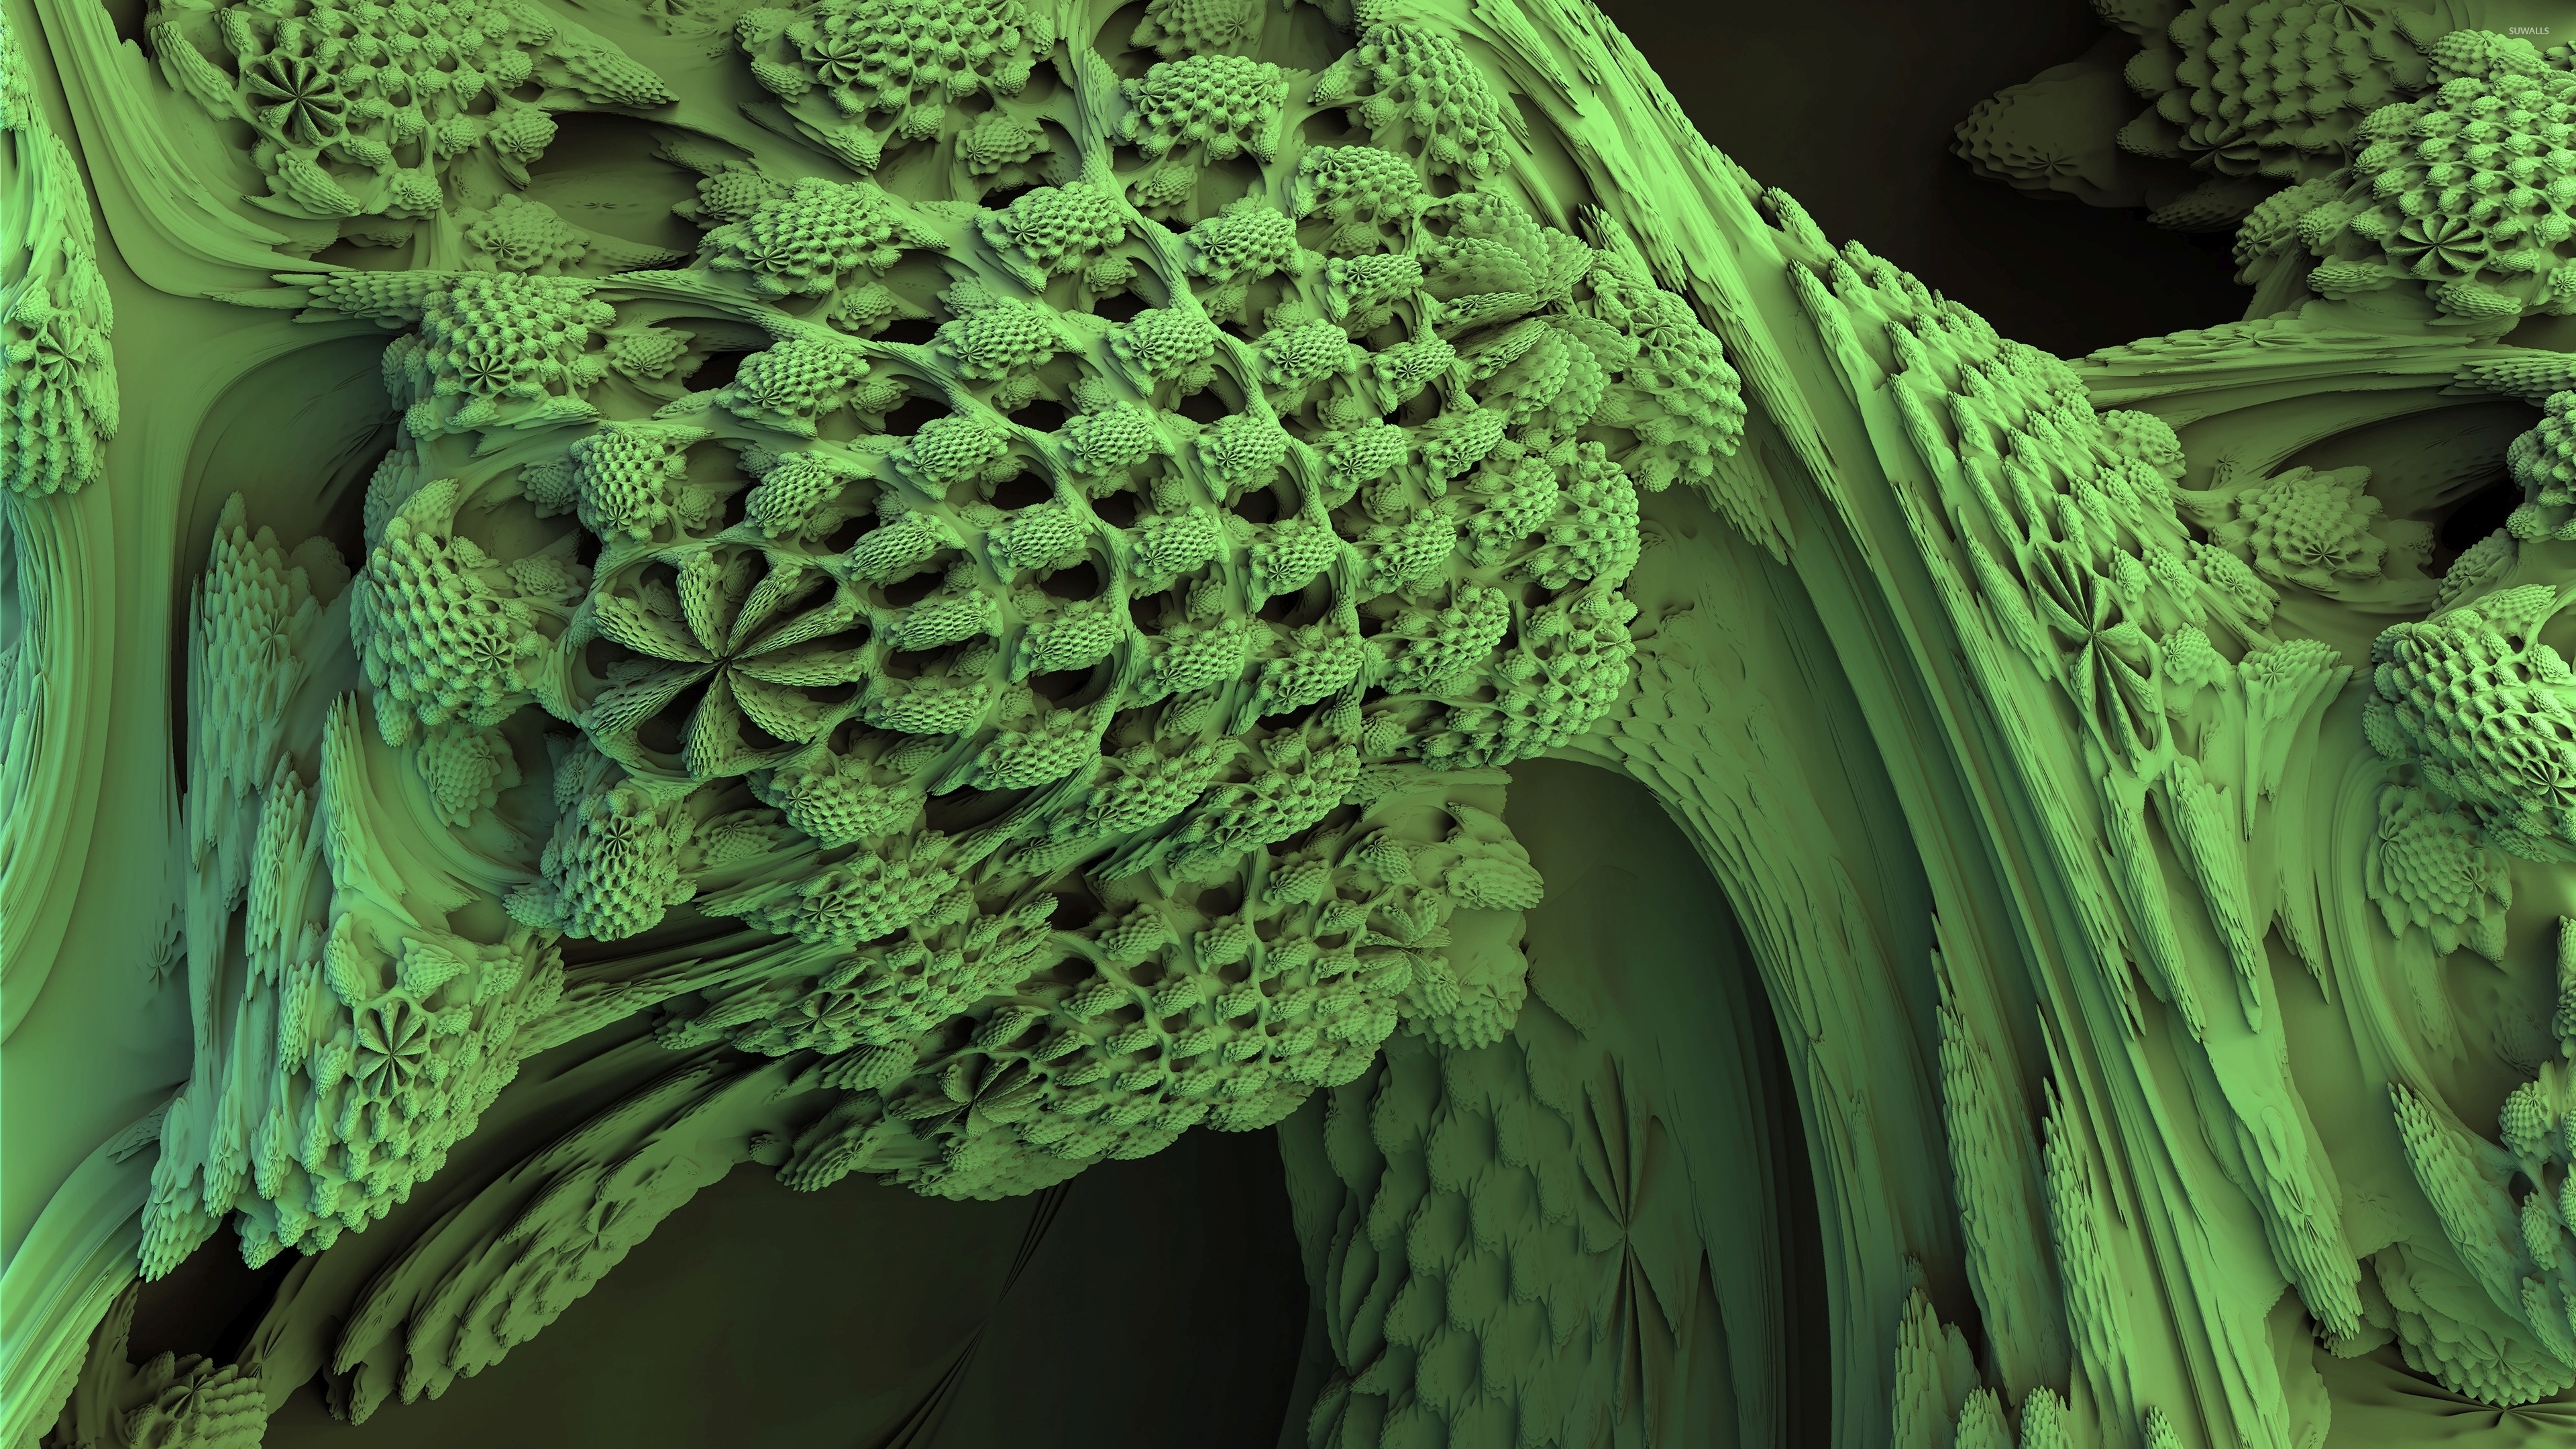 Green fractal, Abstract wallpapers, Colorful imagery, Abstract design, 3840x2160 4K Desktop